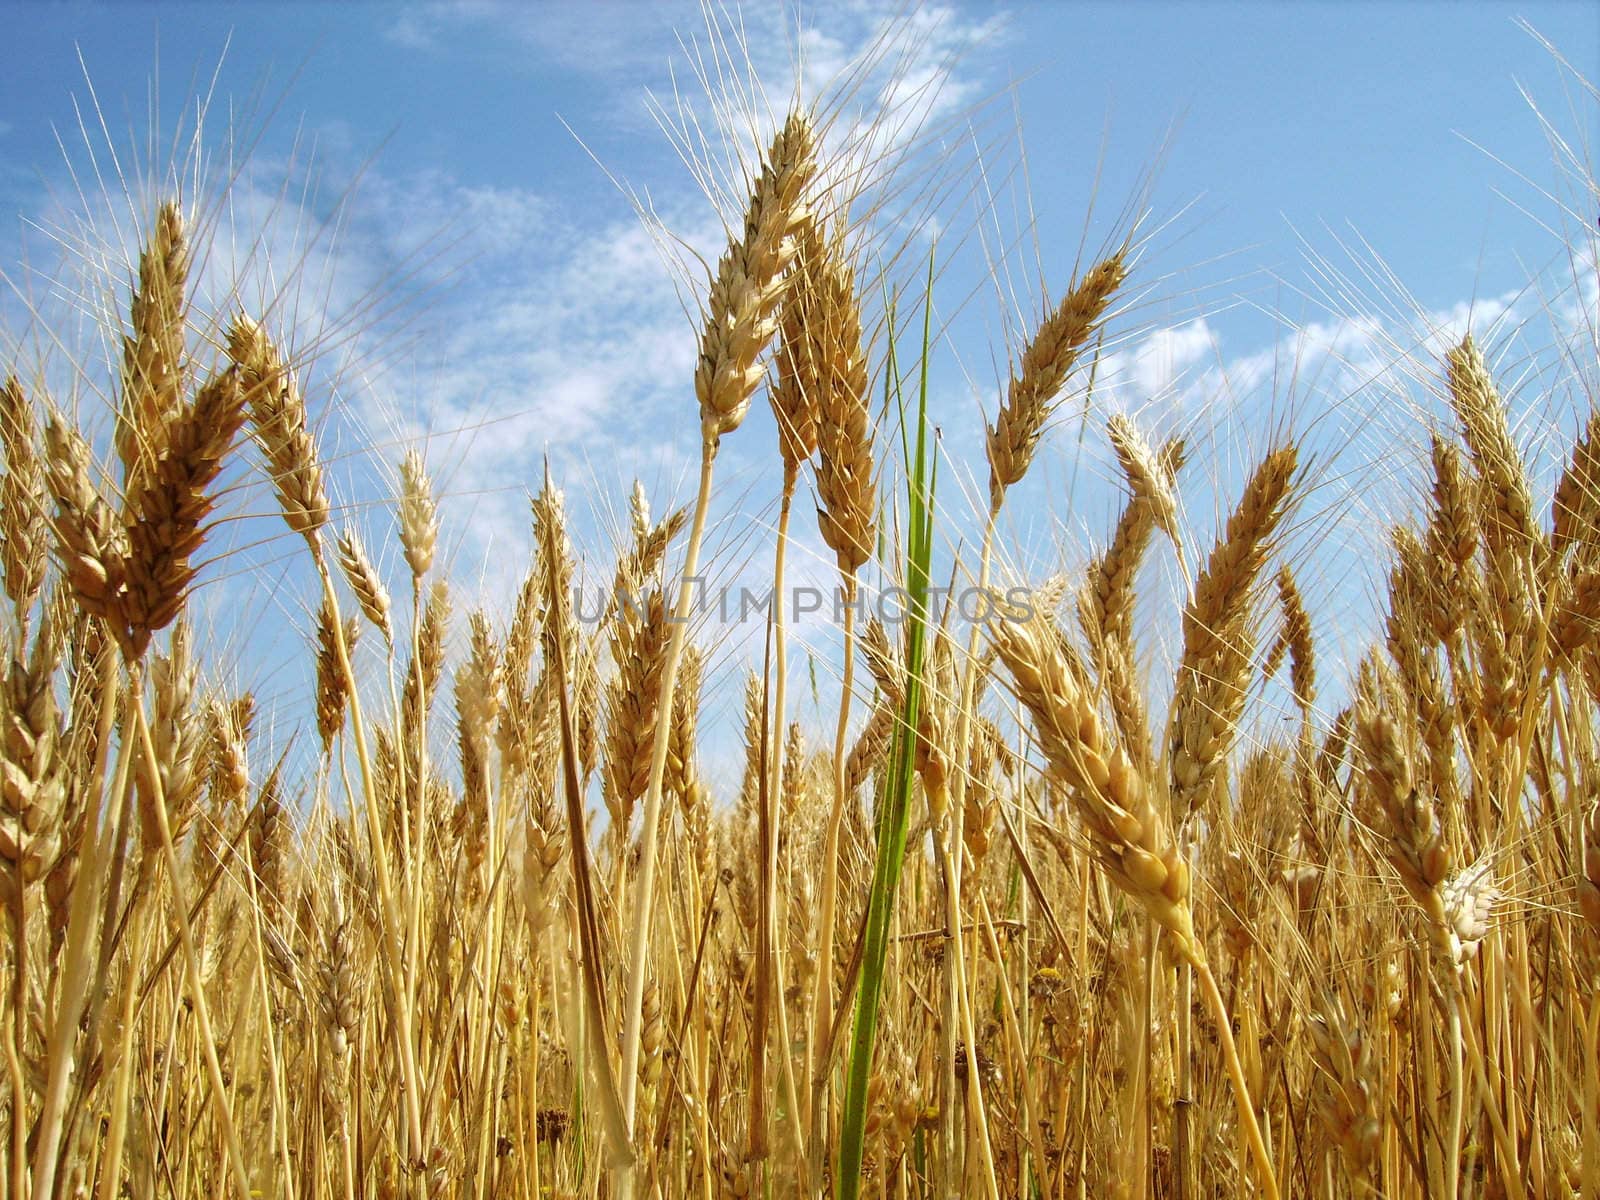 a close image of a crop field with blue sky in background